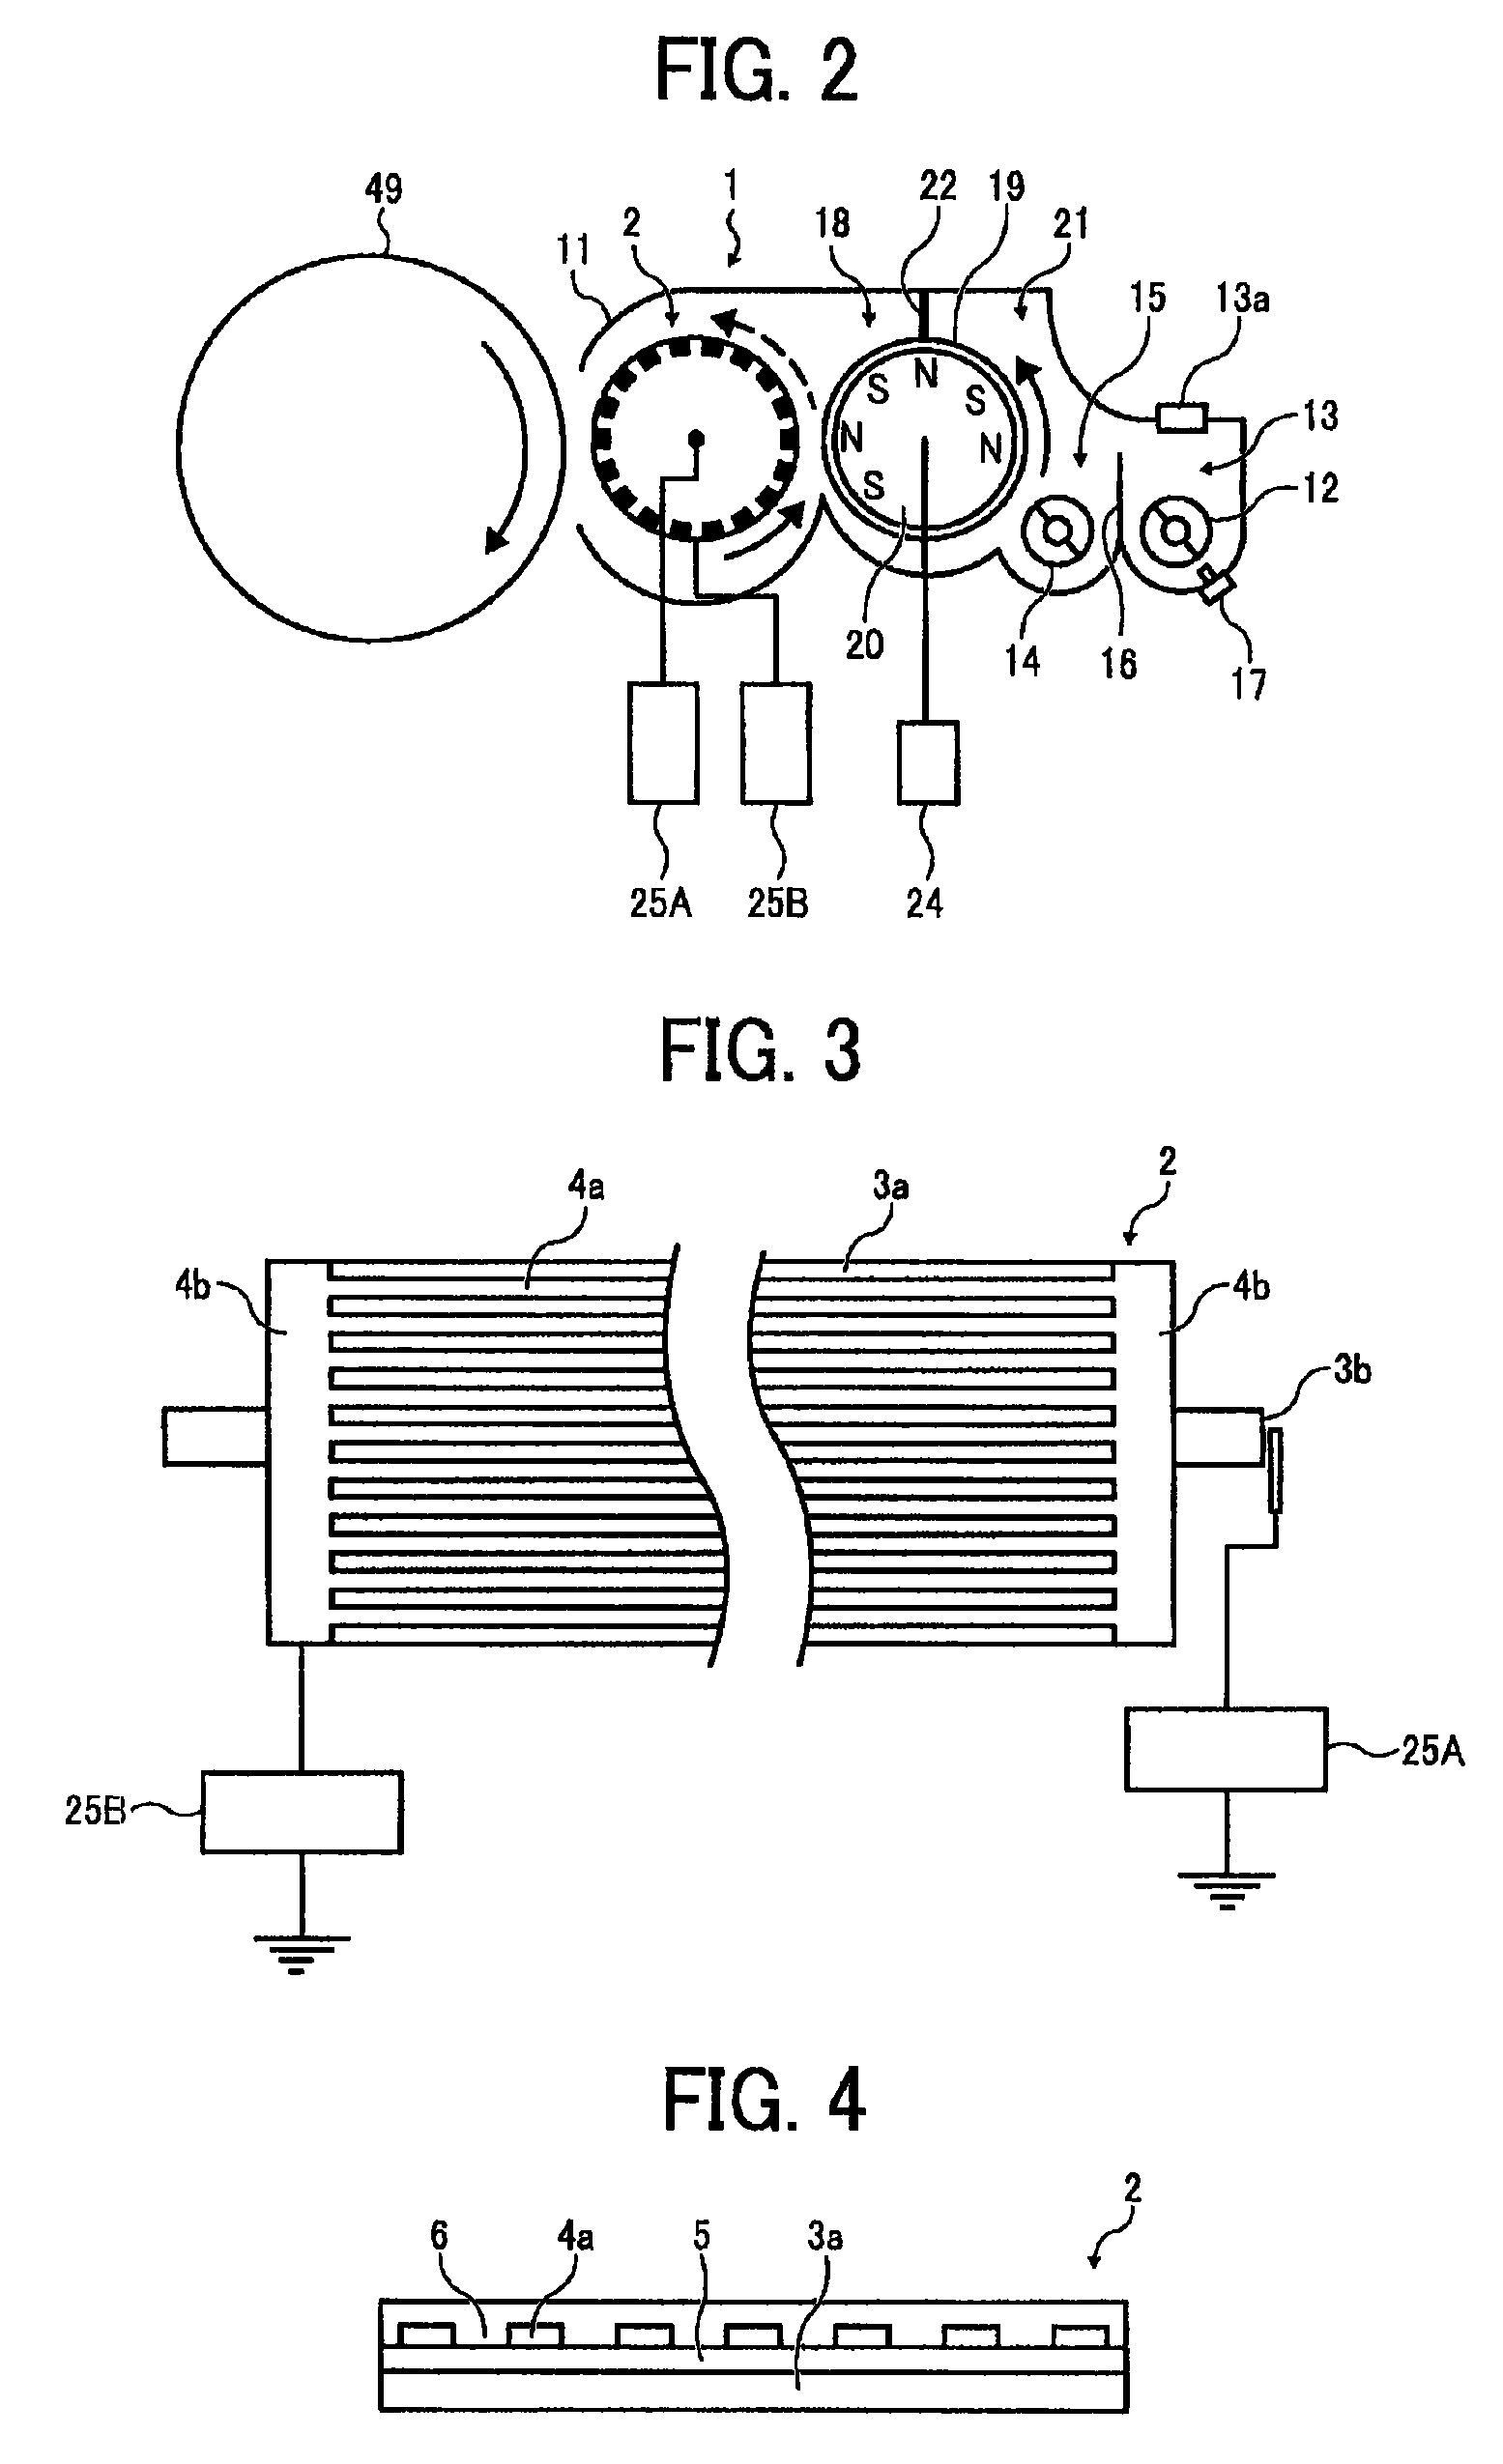 Developer bearing member and developing device with outer electrode including separated portions, and inner electrode for creating electric field